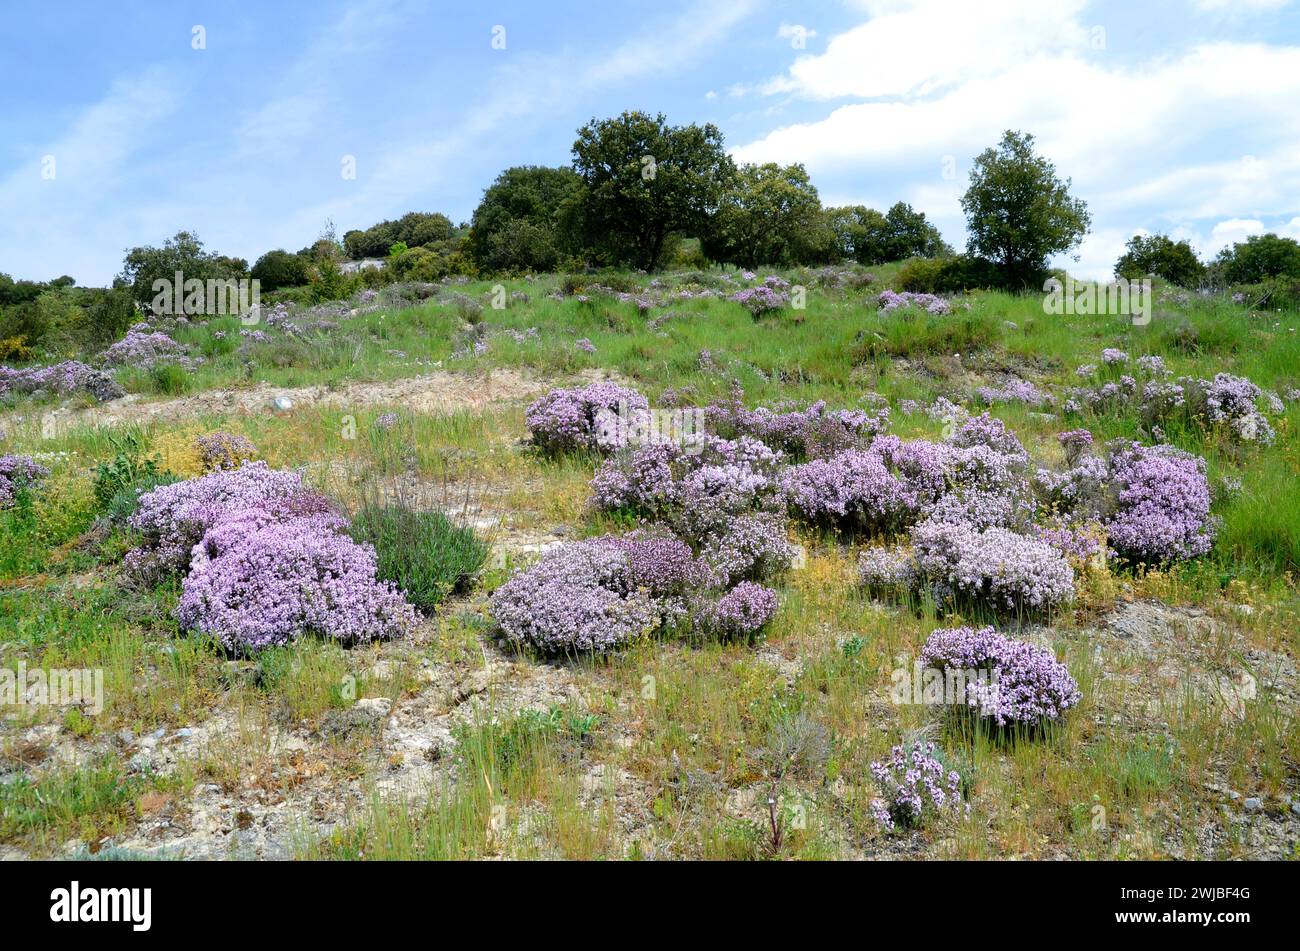 Landscape with thyme bushes (Thymus vulgaris) in flower Stock Photo